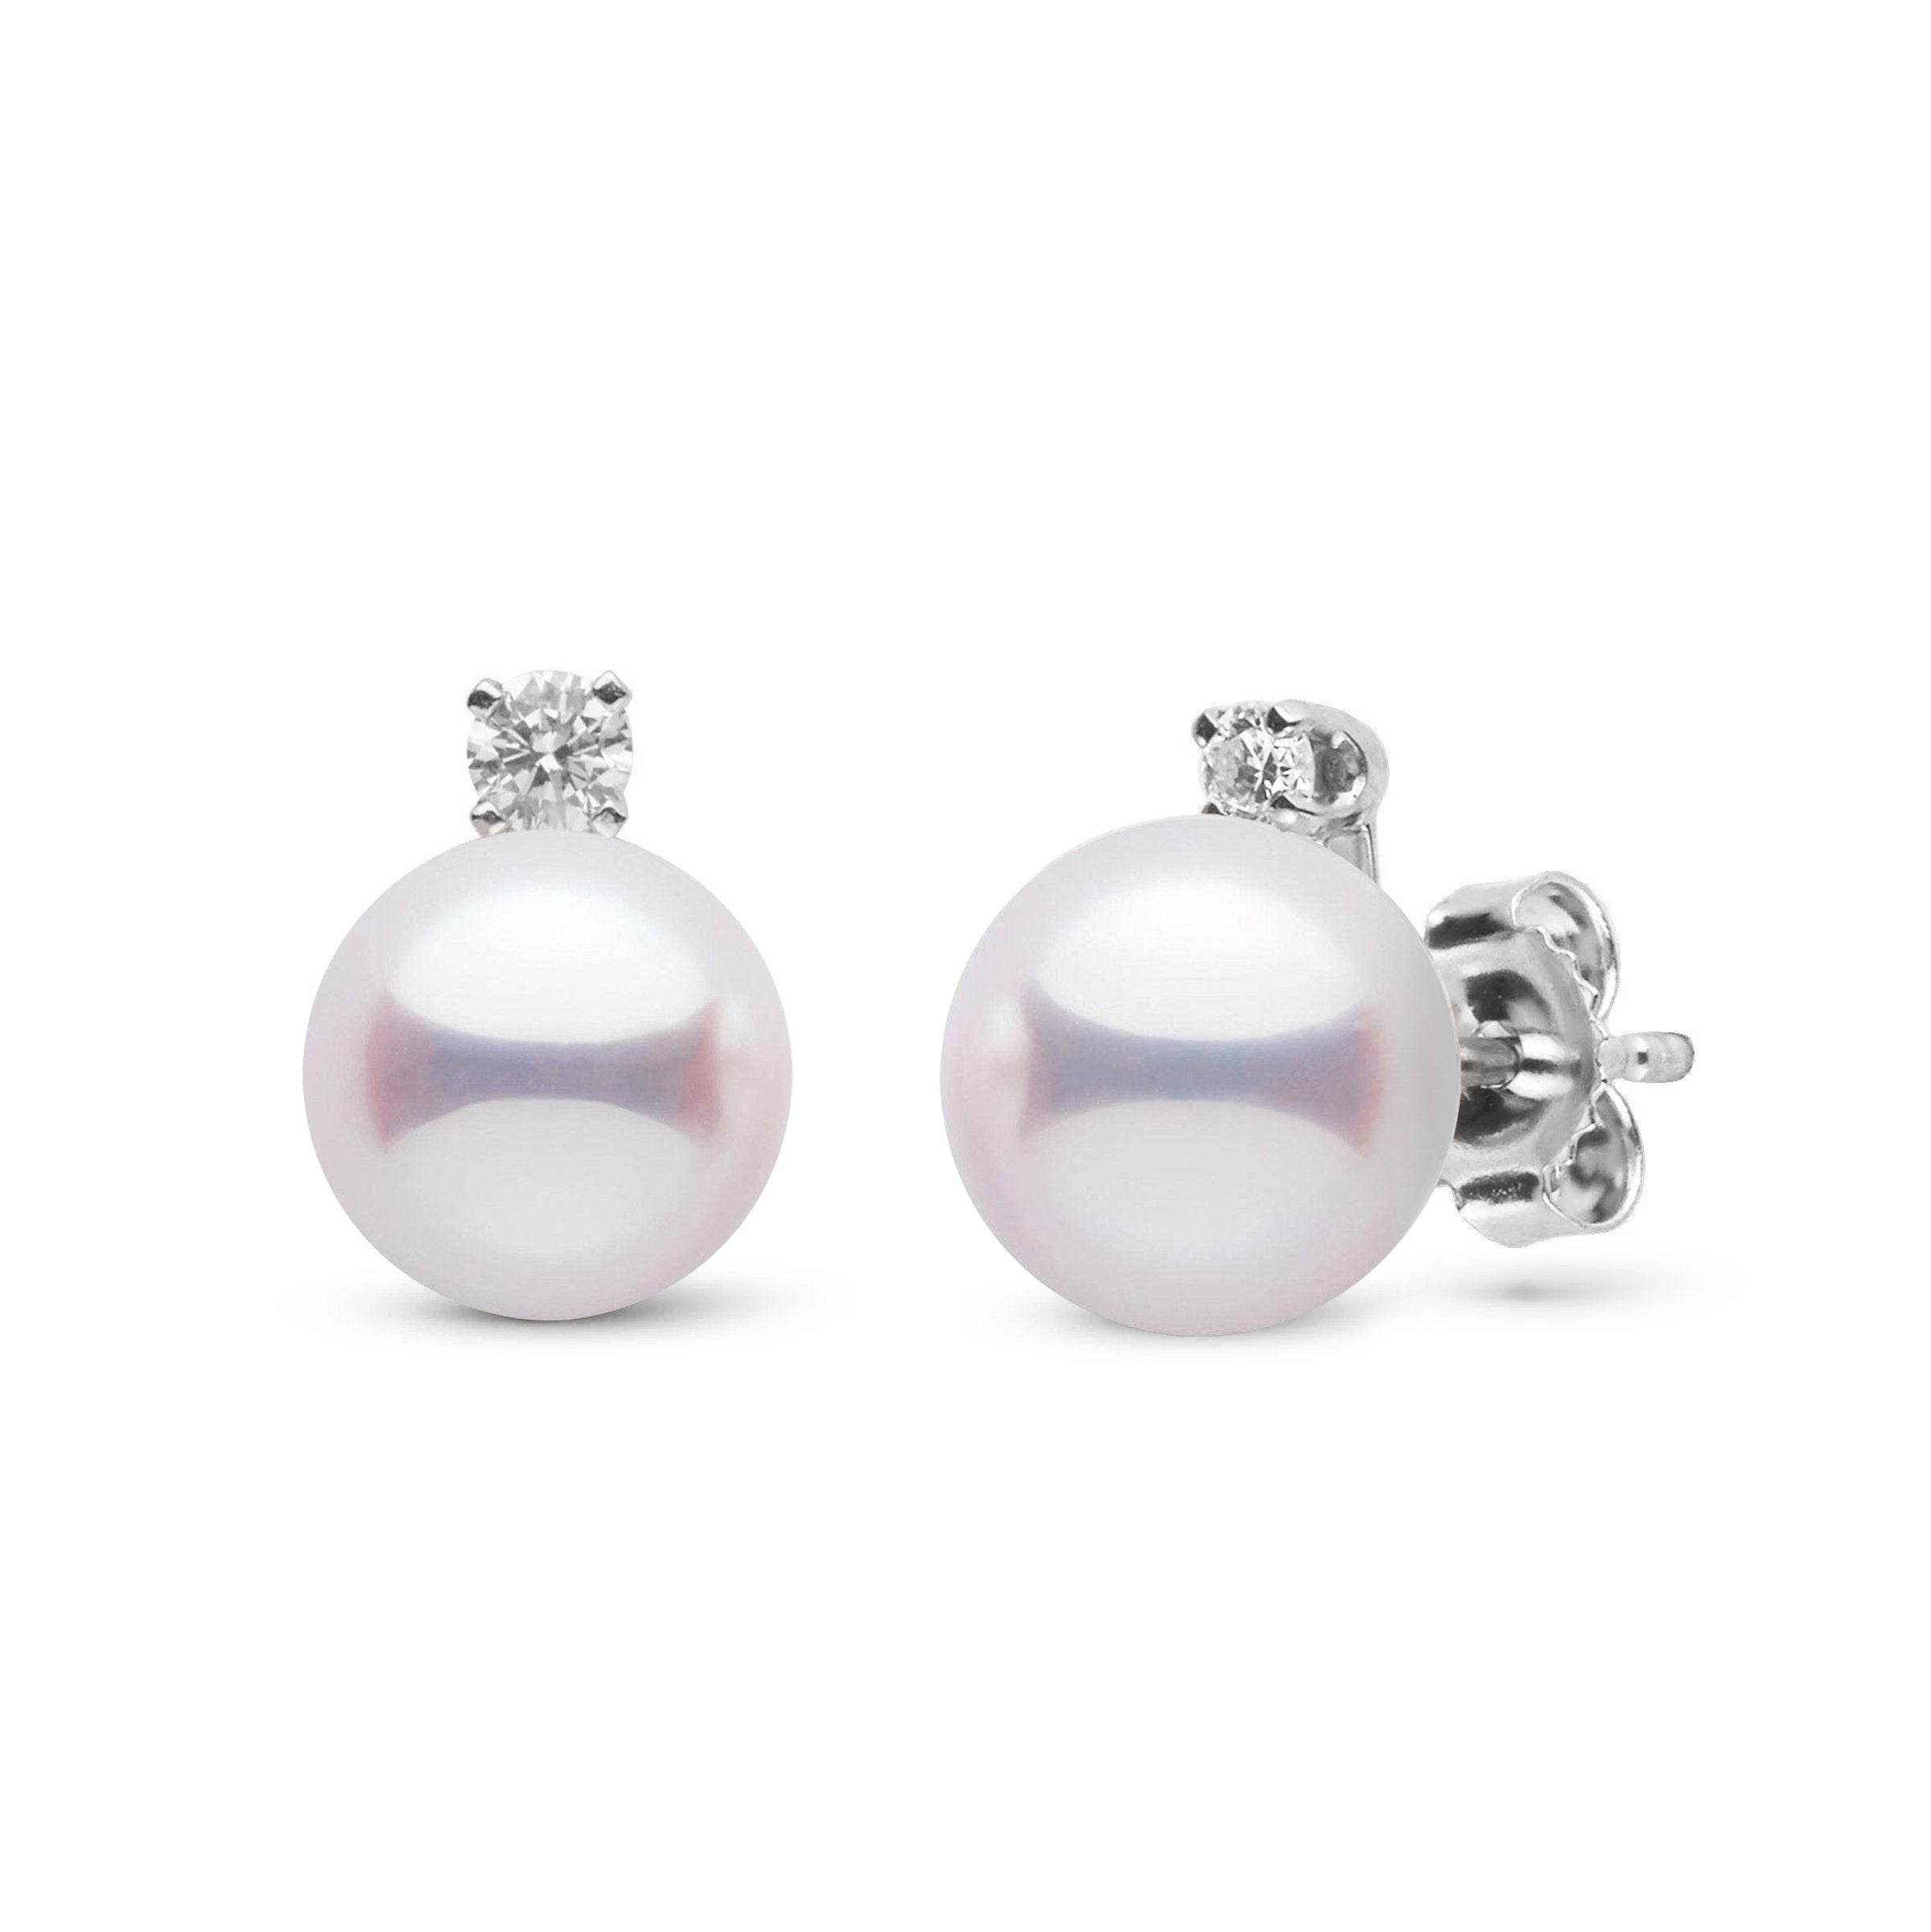 Lab Certified 7.5-8.0 mm White Hanadama Pearl and VS1-G Quality Diamond Stud Earrings in white gold